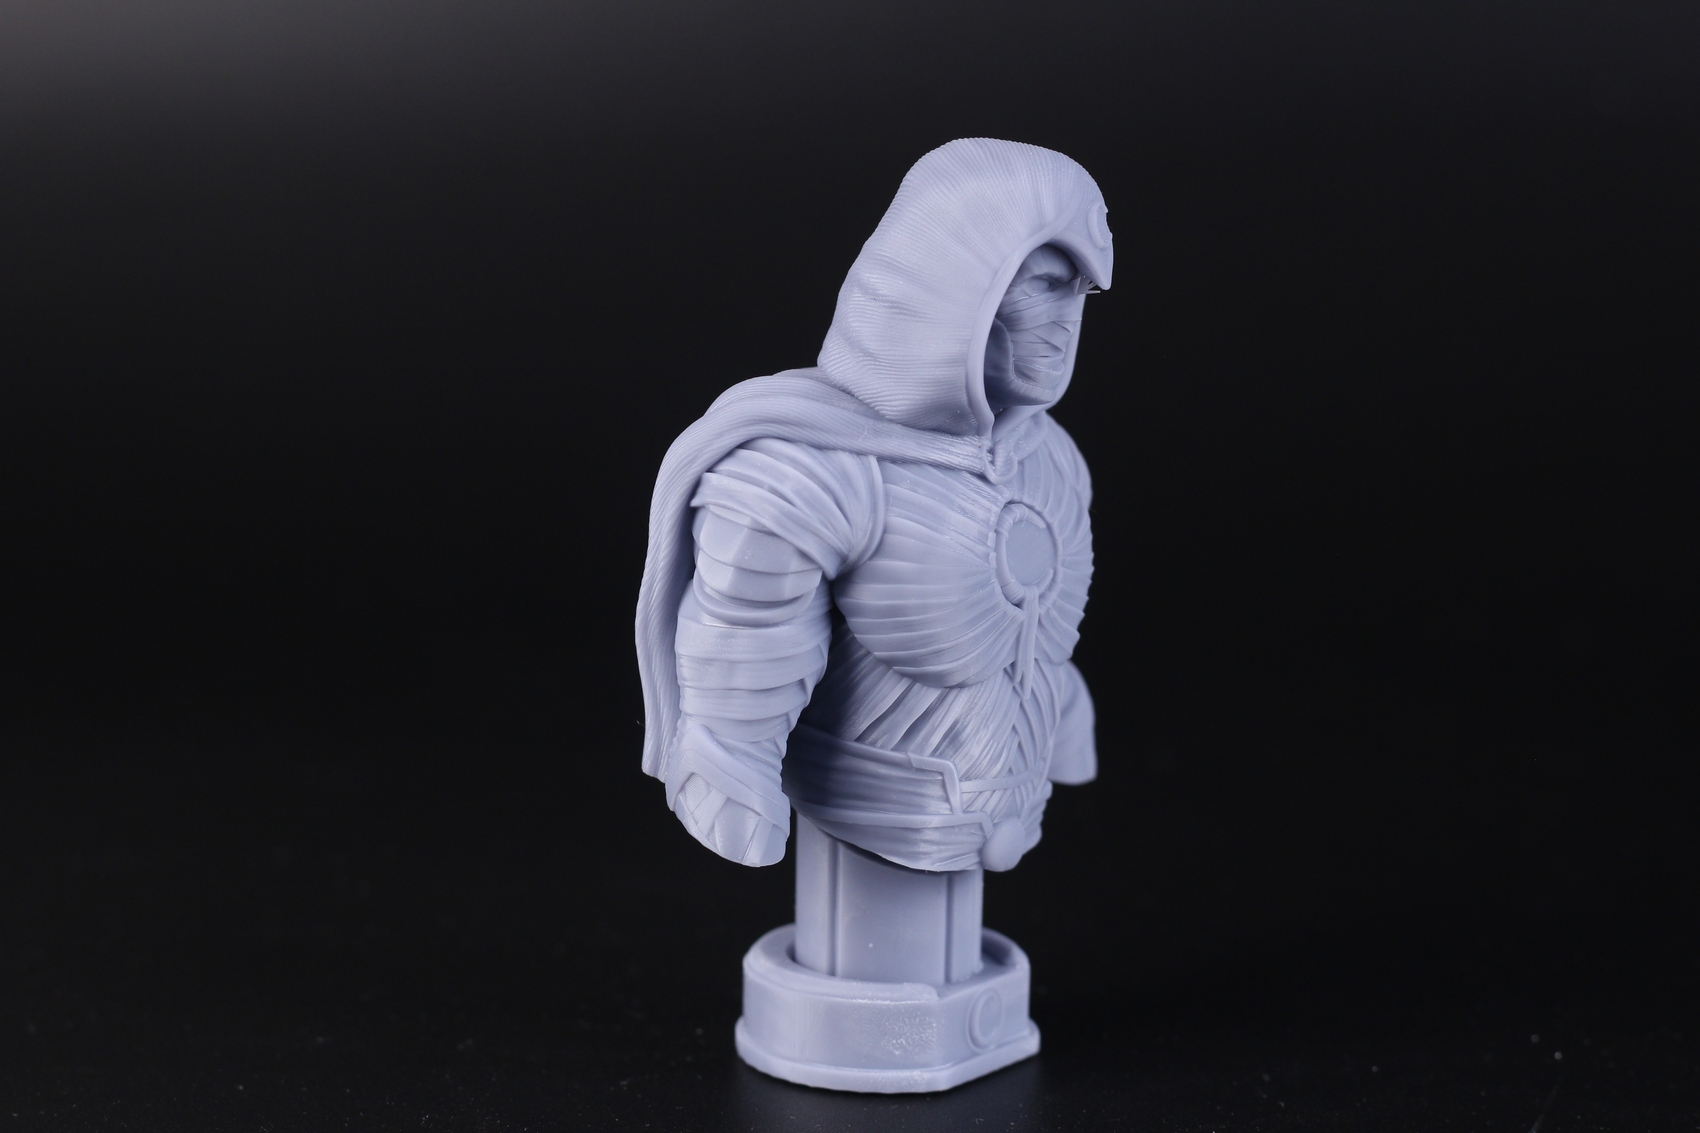 Moon Knight Bust Anycubic Photon M3 Review2 | Anycubic Photon M3 Review: Bridging the gap